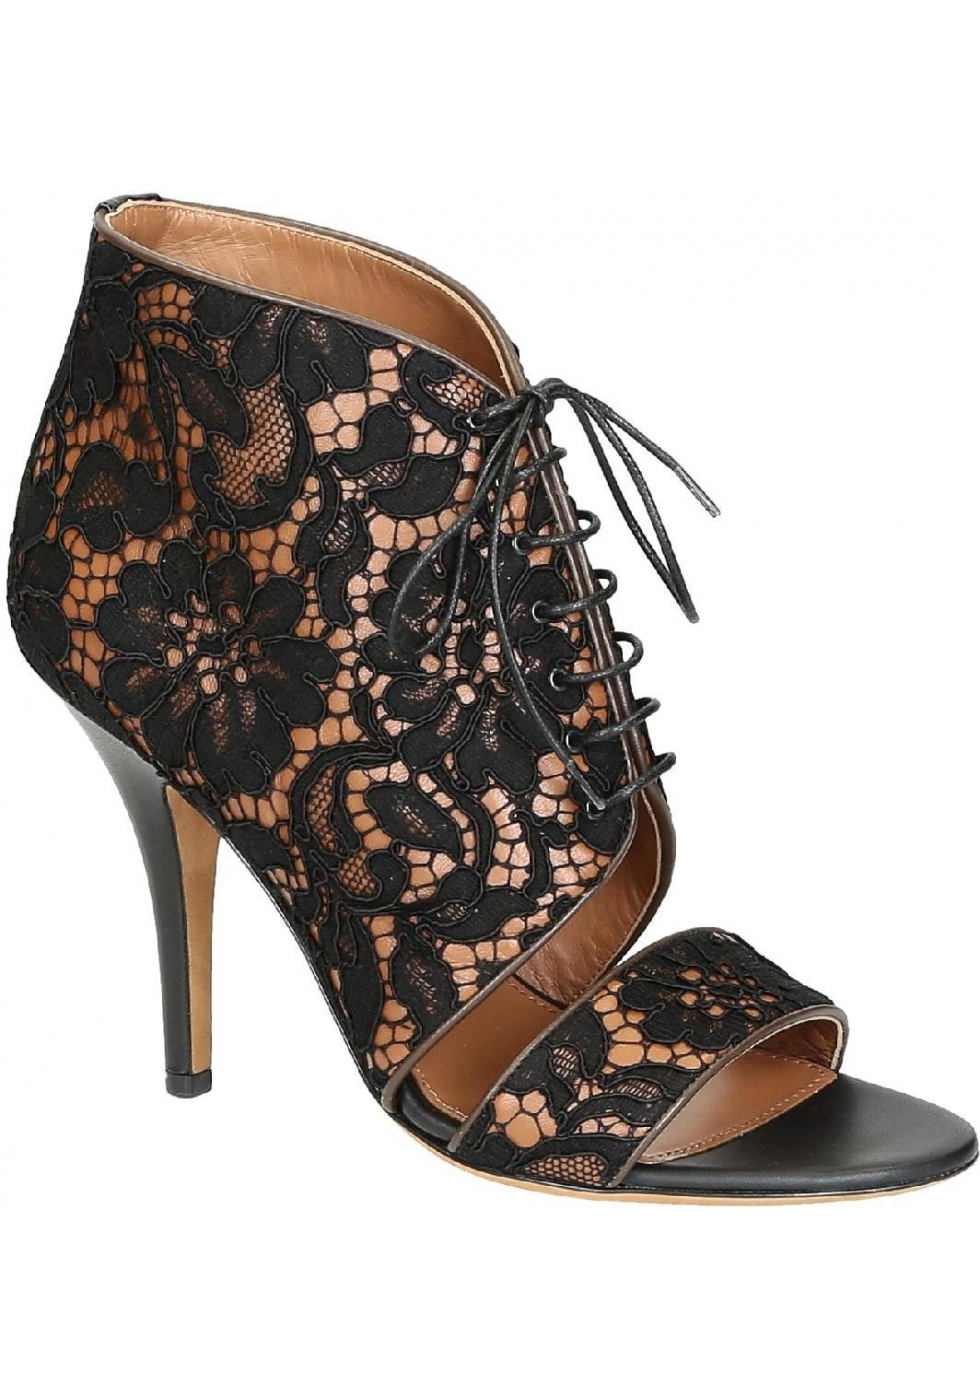 Givenchy high heel black lace fabric sandals shoes - Italian Boutique